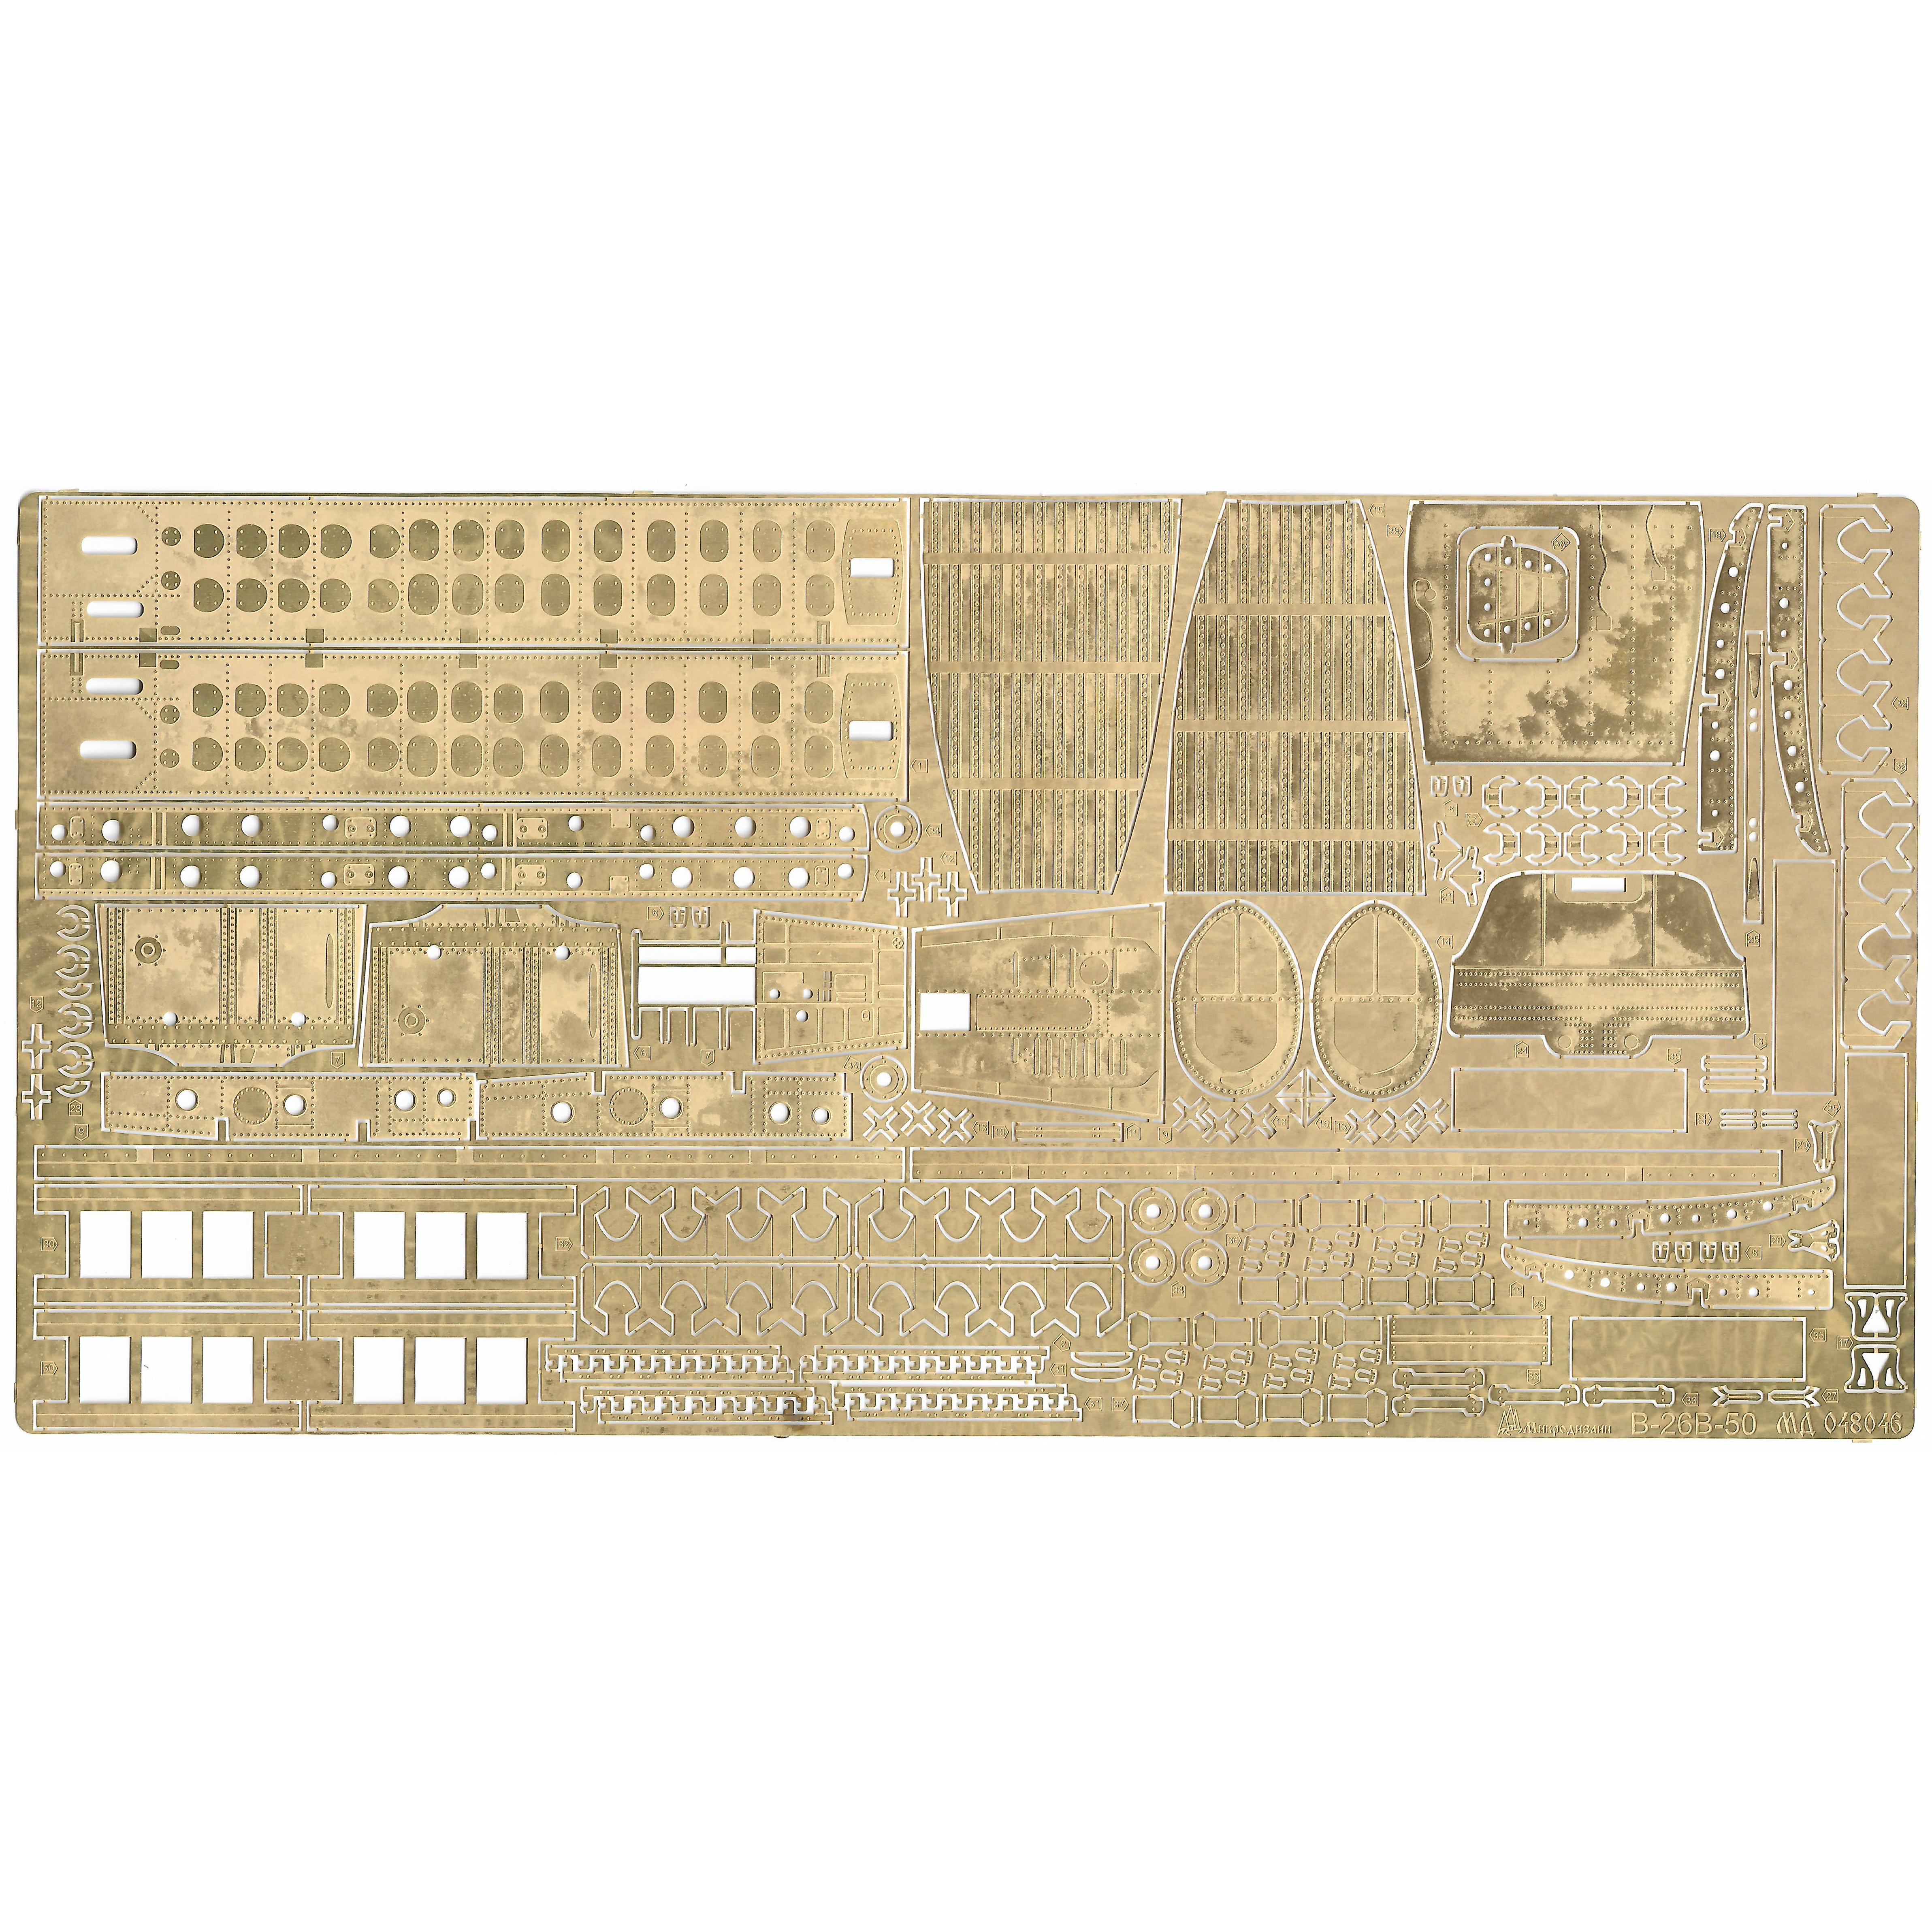 048046 Micro Design 1/48 Photo etching kit for chassis and bomb bay on B-26B-50 (ICM)